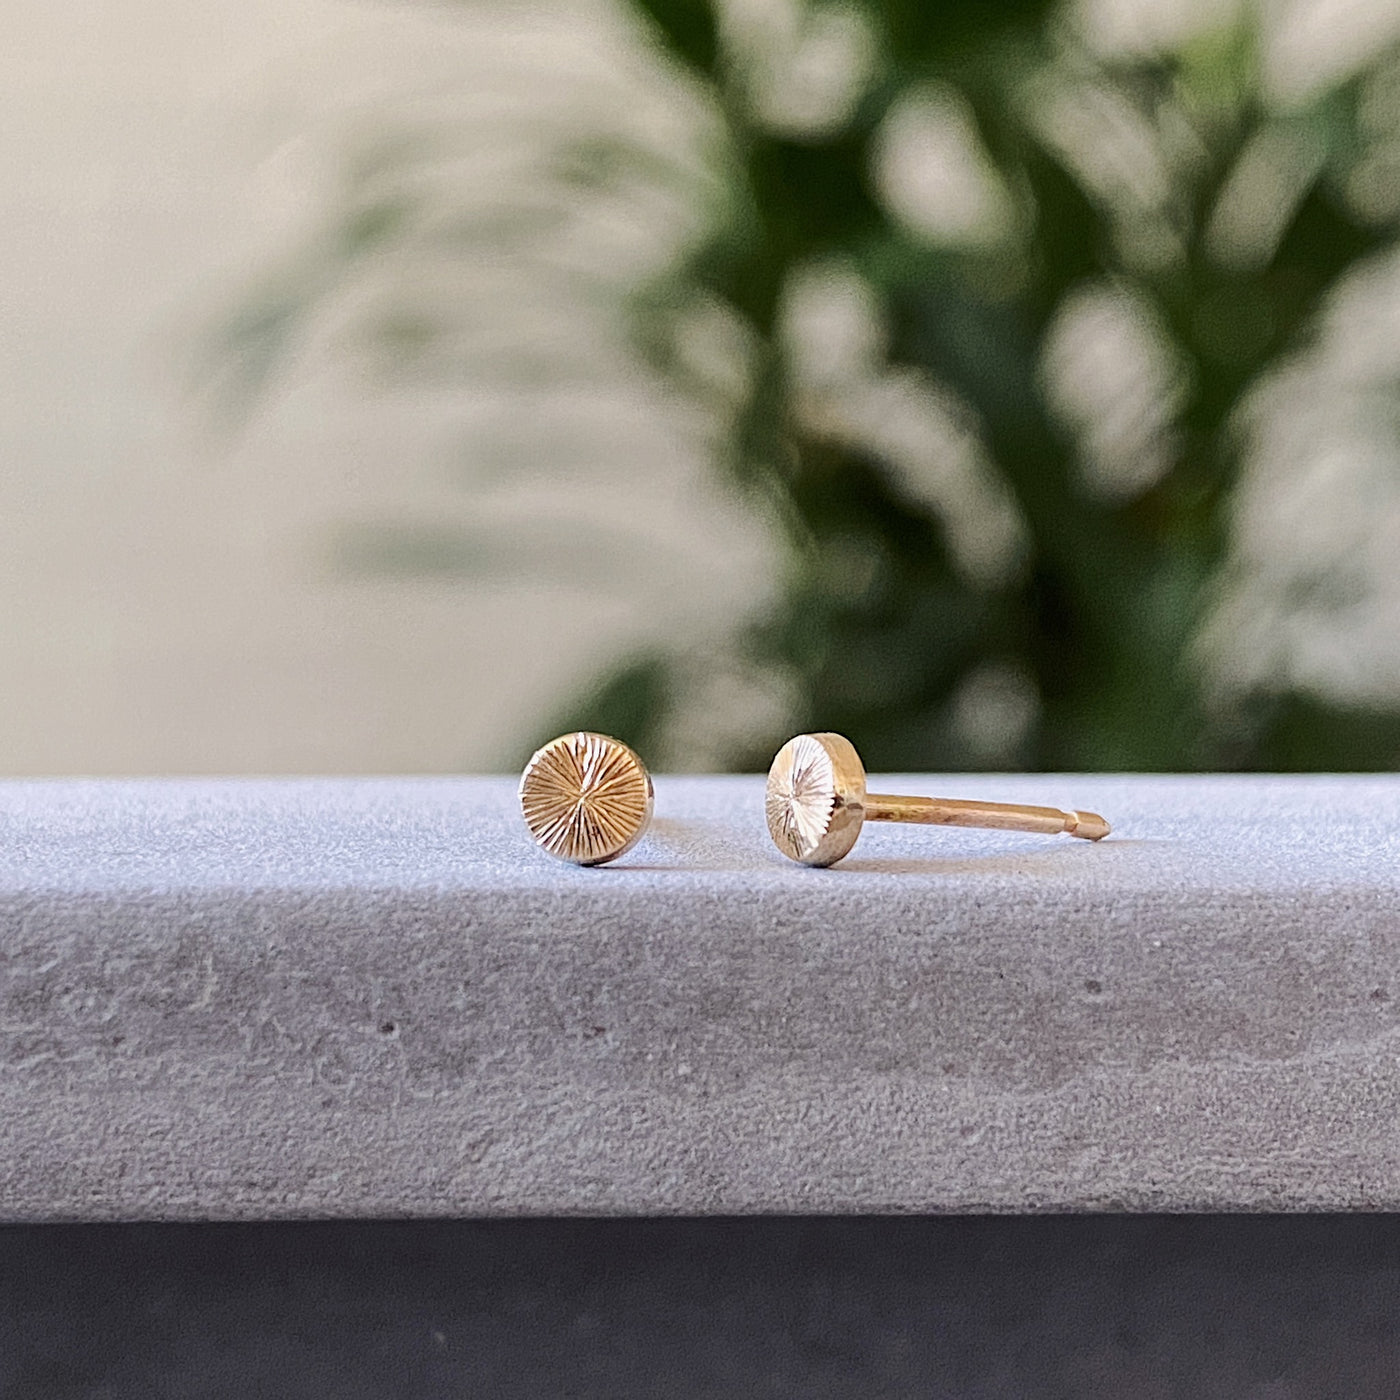 Tiny engraved gold stud earring by Corey Egan side view on concrete